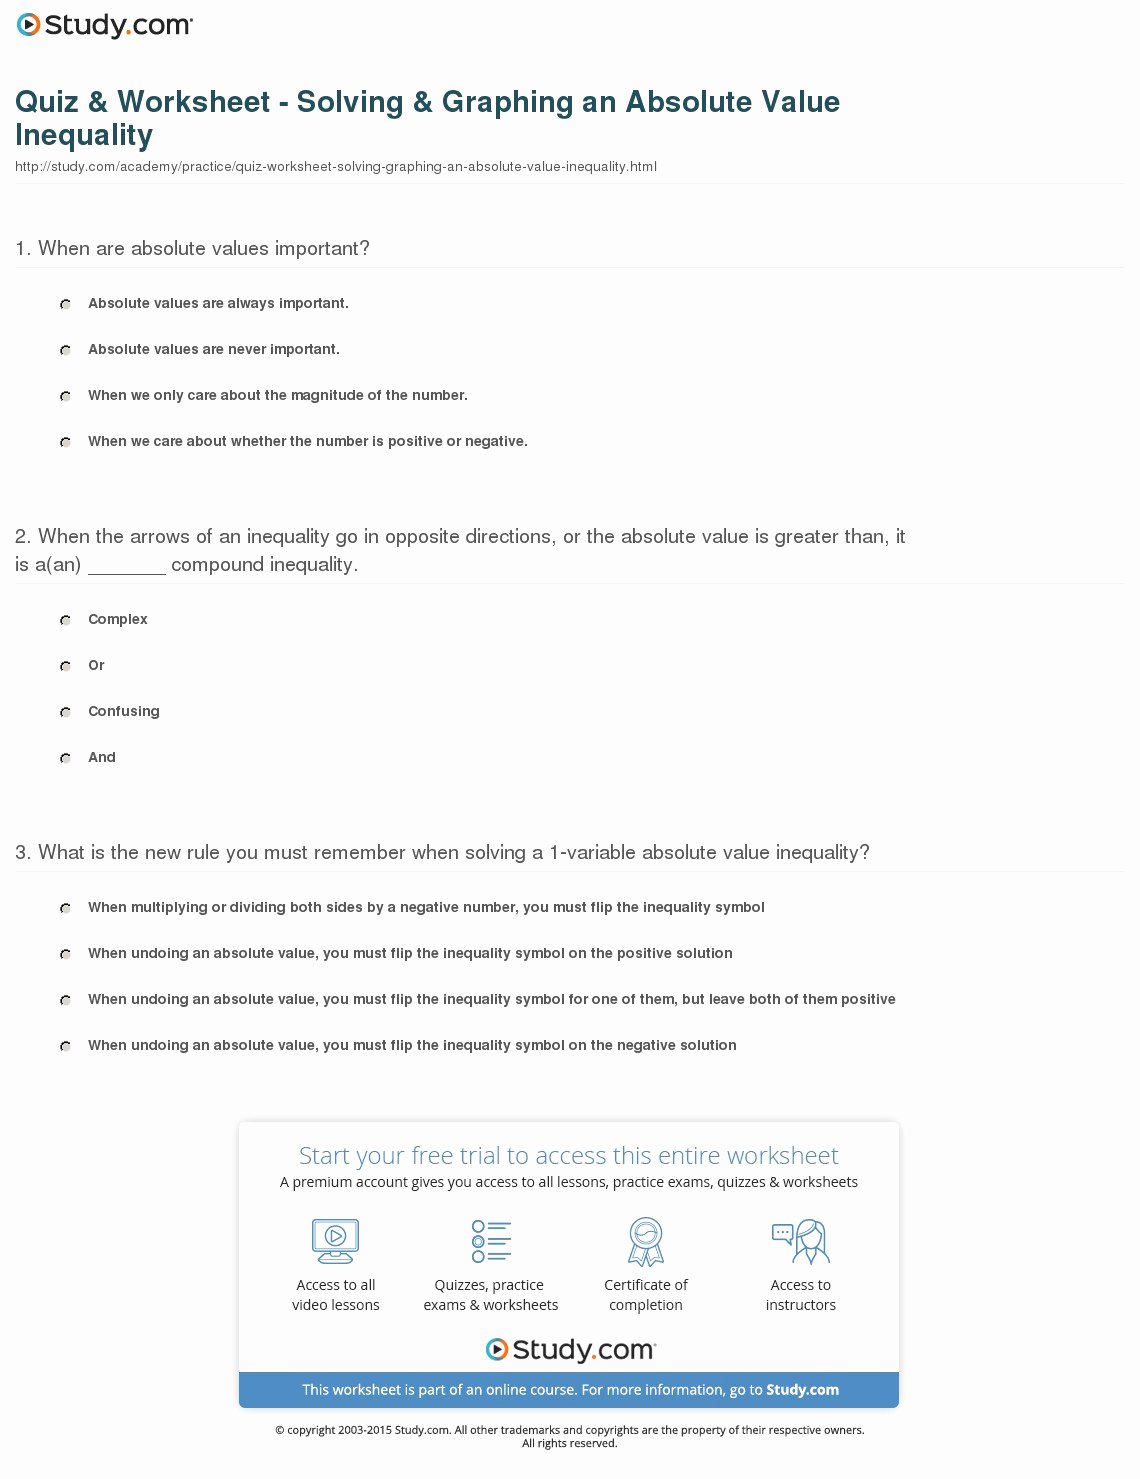 Solving Absolute Value Equations Worksheet Luxury Quiz &amp; Worksheet solving &amp; Graphing An Absolute Value